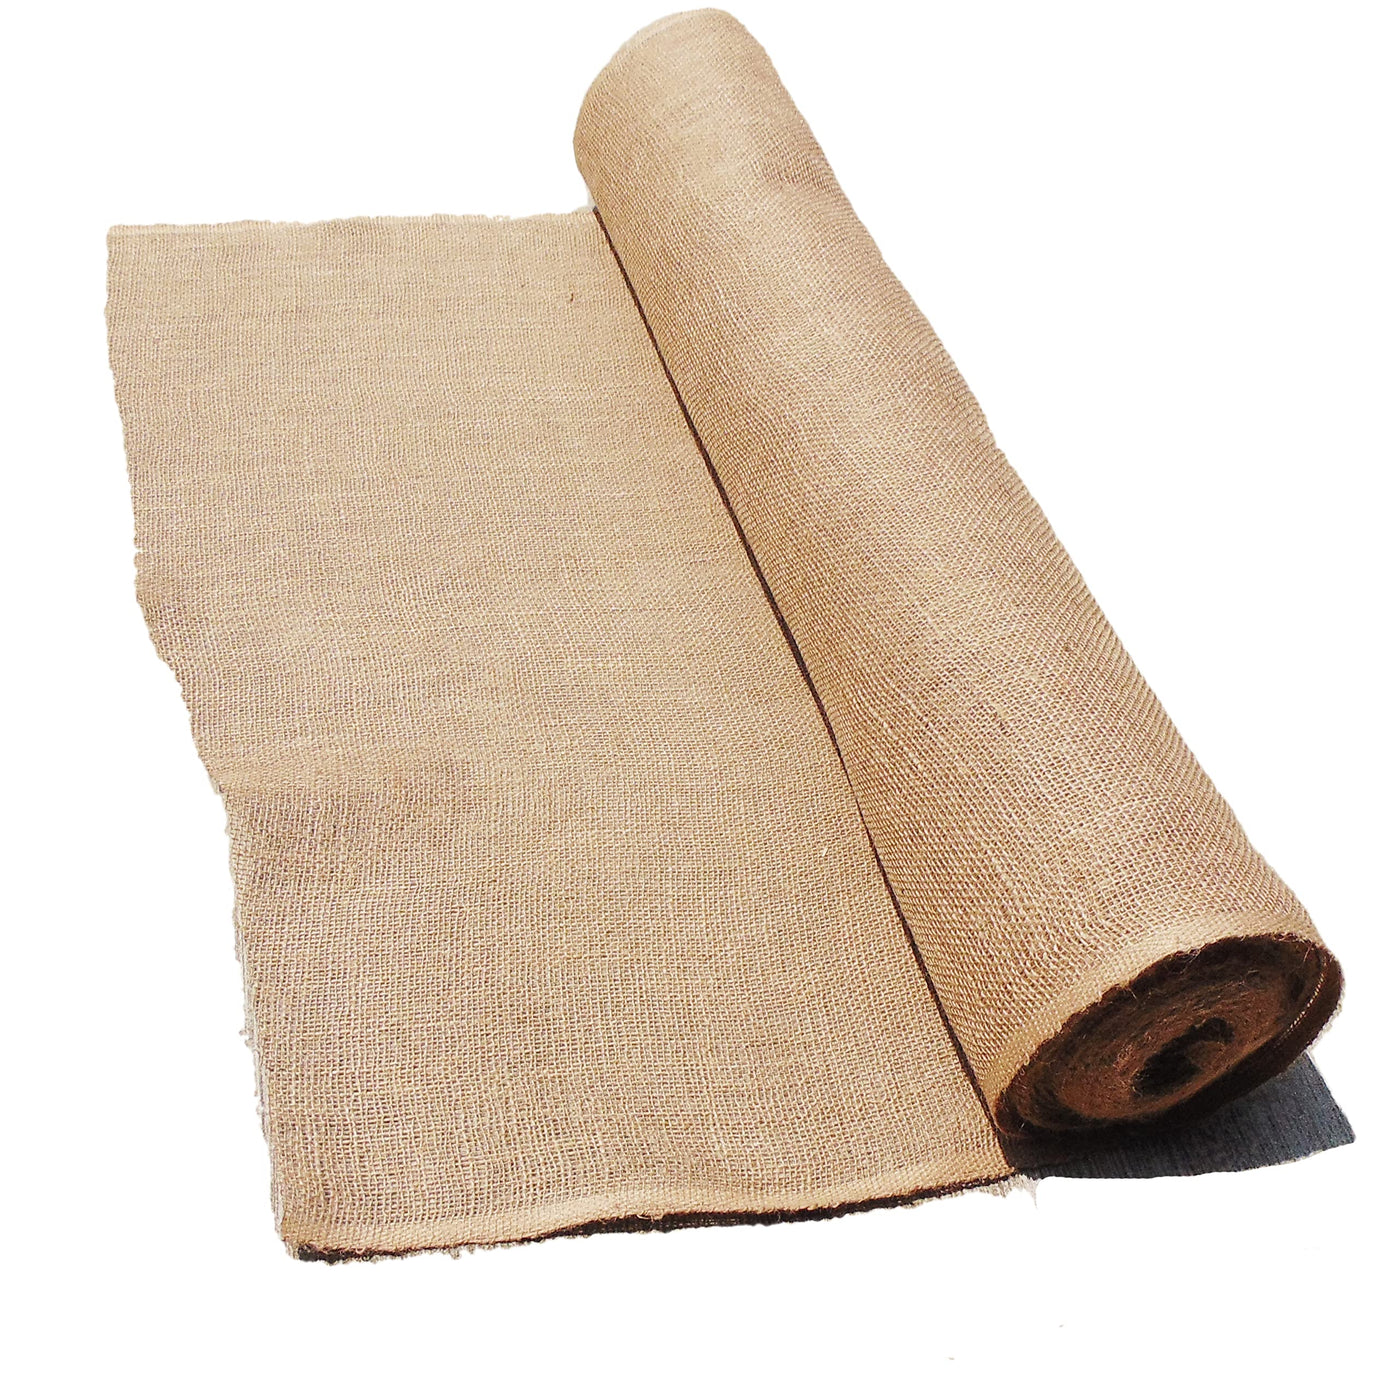 AAYU 40" Wide Light Weight Burlap Fabric roll 150 -Ft Long, Lose Weaved Garden Netting, Edging, Erosion Control & Weed Barrier